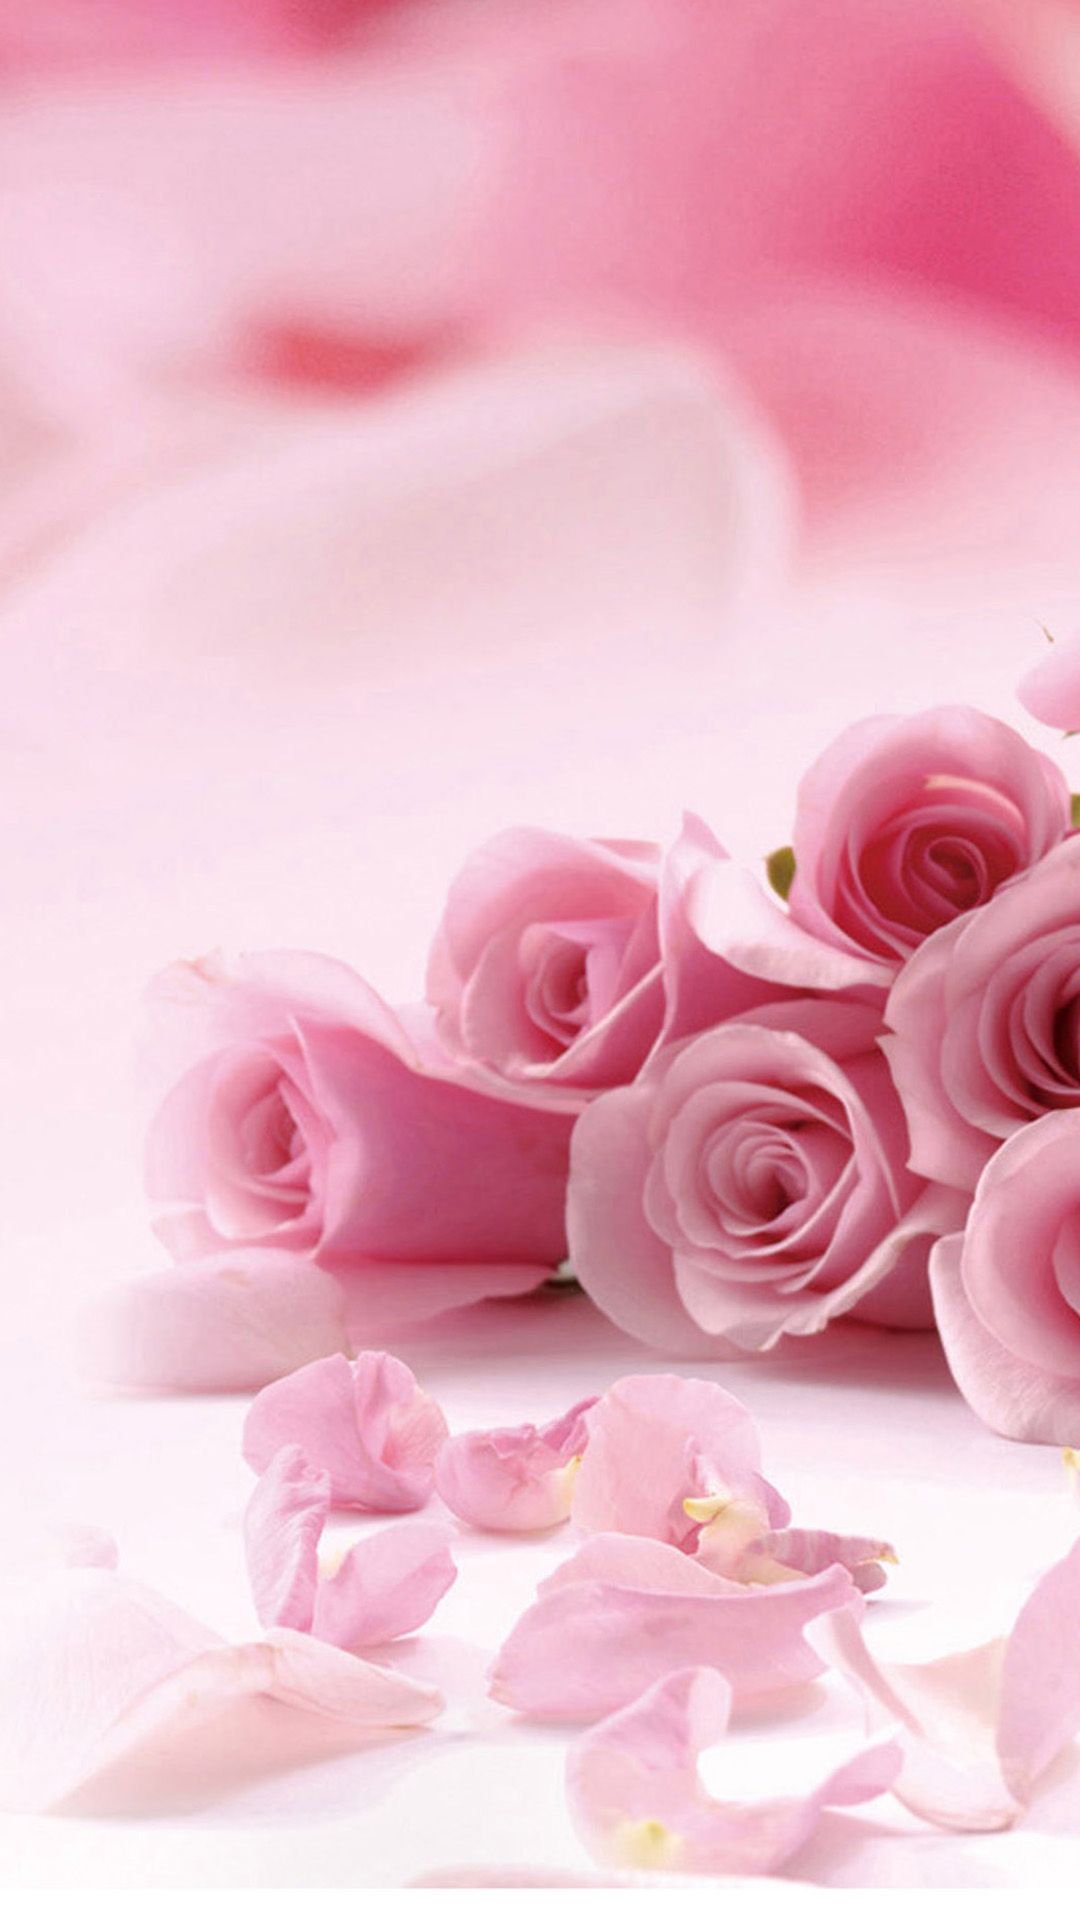 Wallpaper With Pink Roses And Petals For Iphone - Pink Flower Wallpaper Iphone , HD Wallpaper & Backgrounds